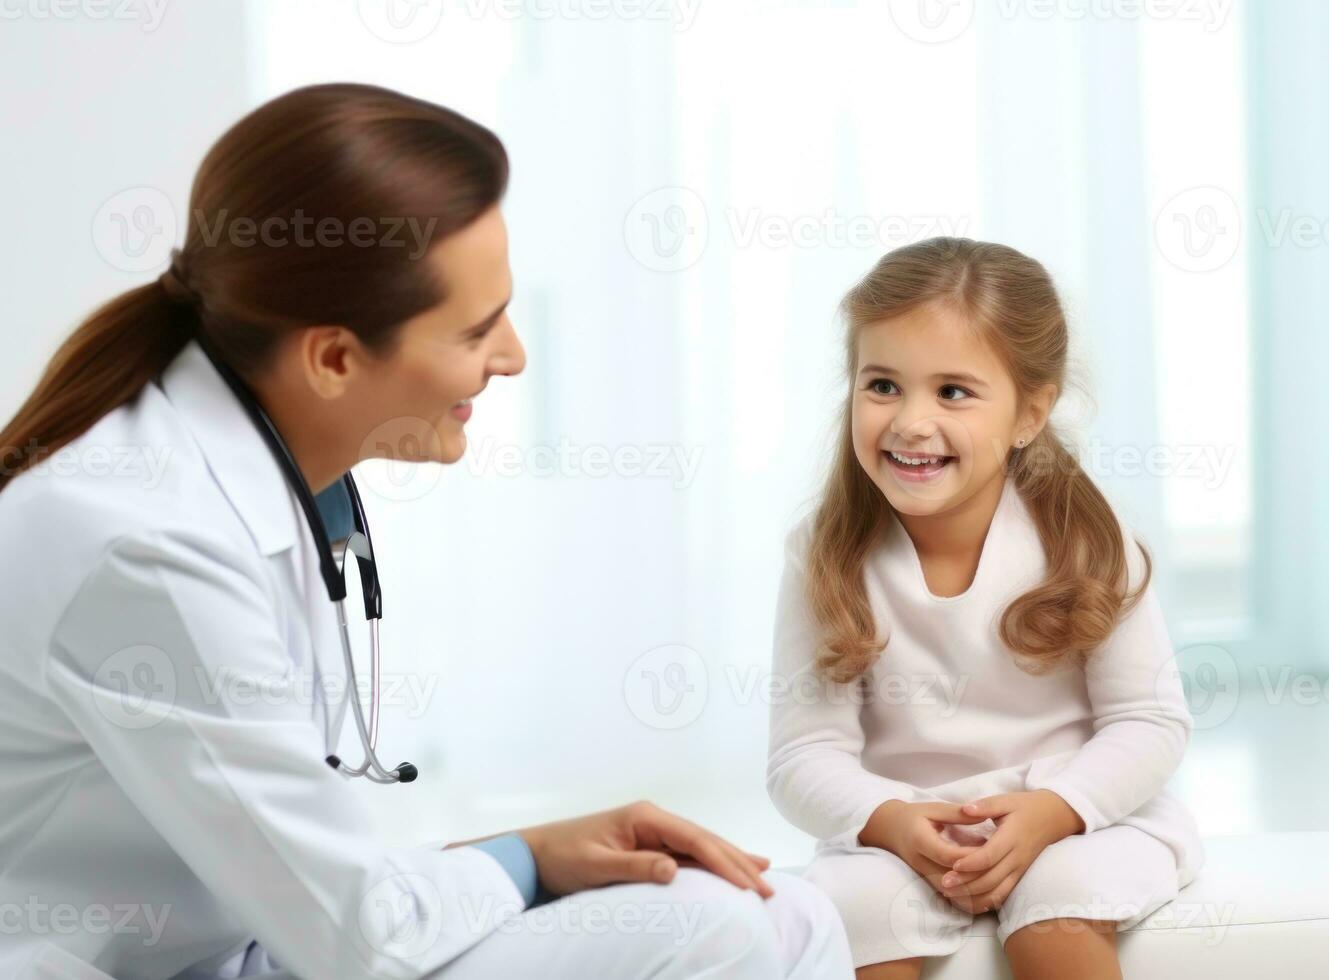 A nurse is looking at an older child with a stethoscope photo